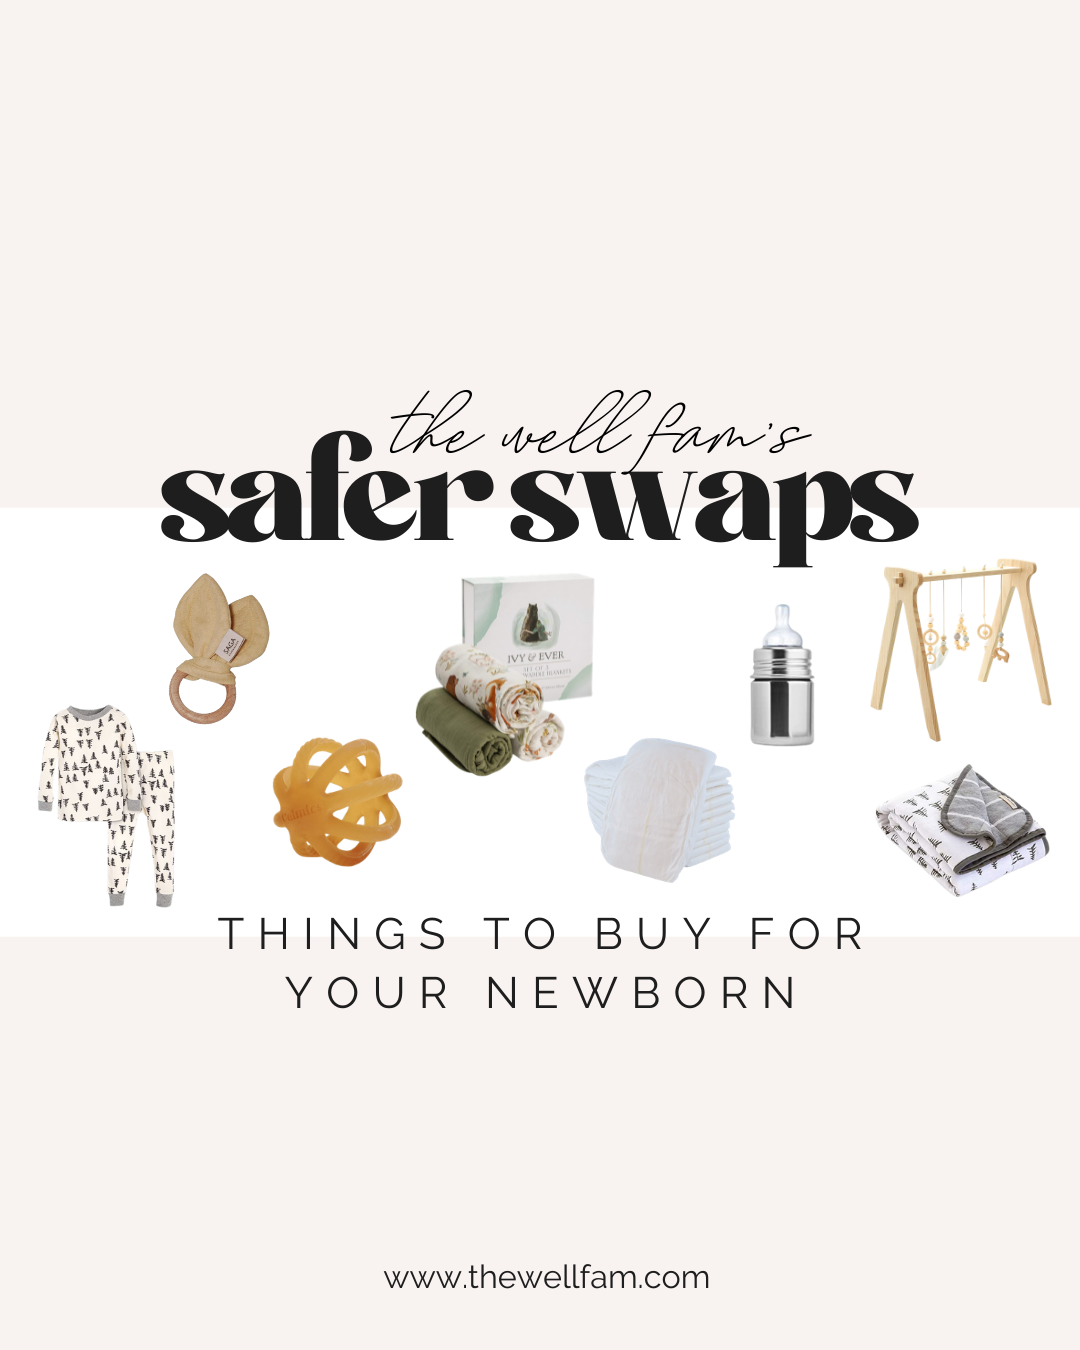 Things to buy for your newborn - safer swaps for the nursery